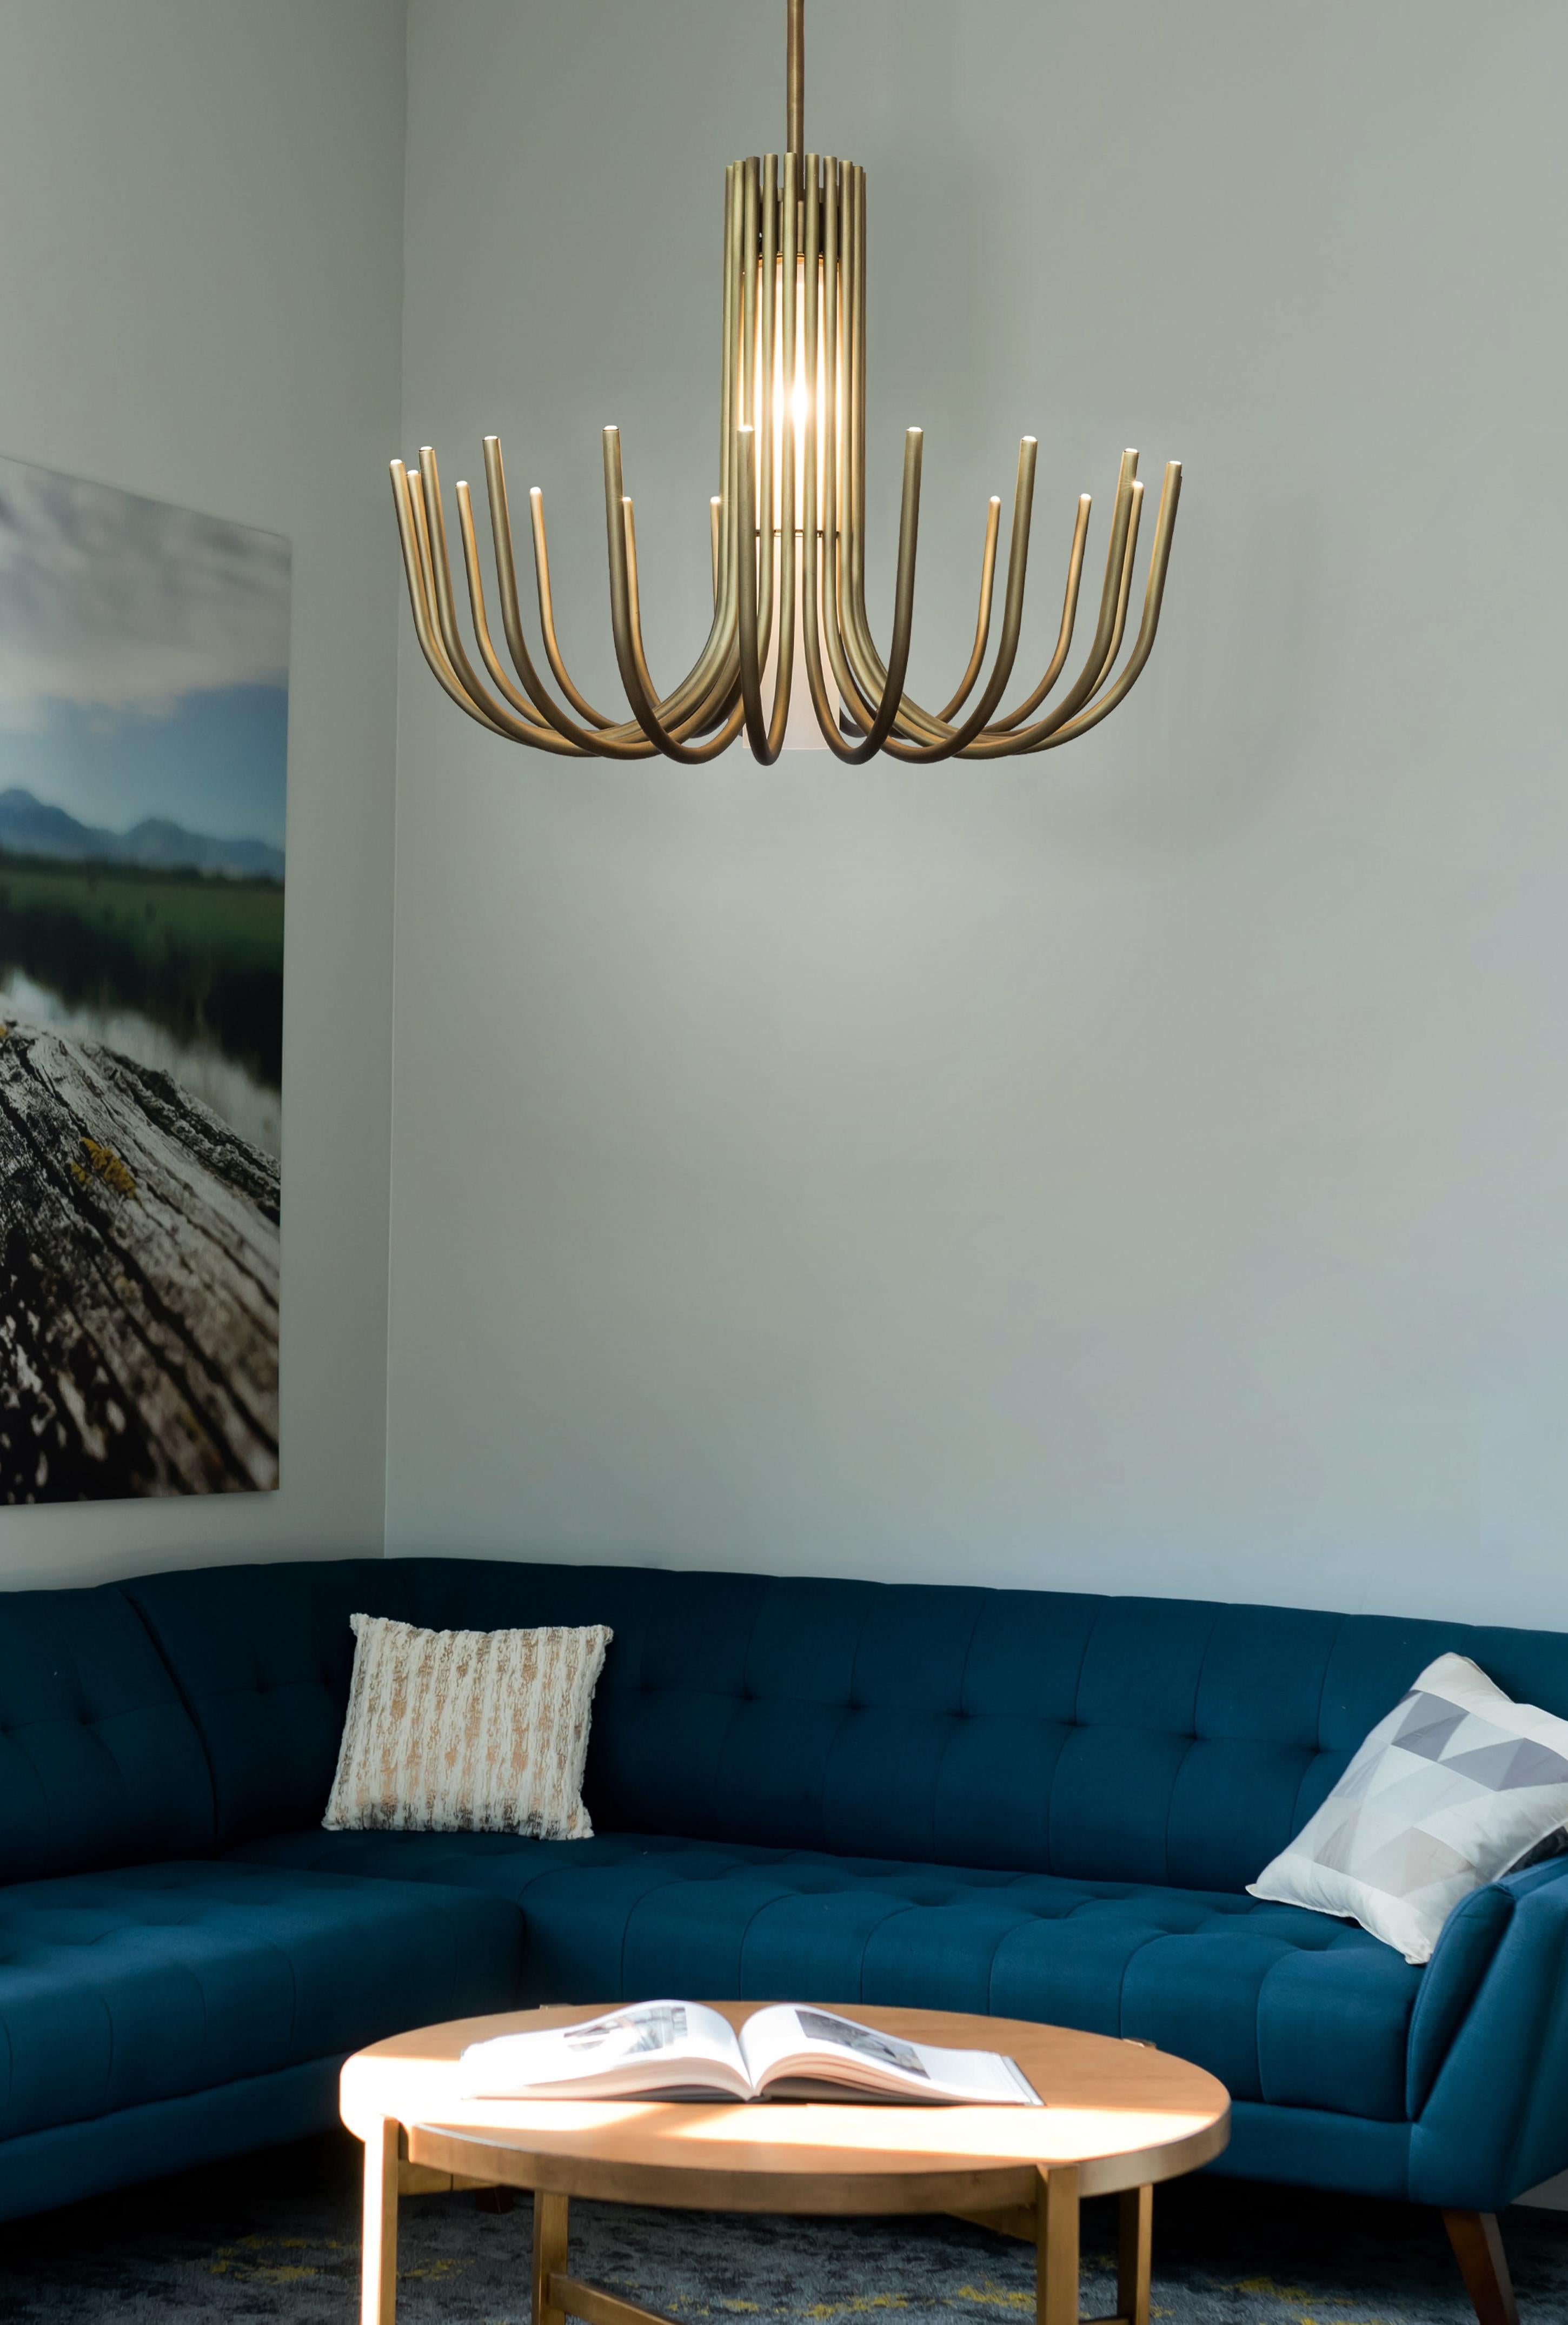 Inspired by the big classic chandeliers, but with a more essential look given by the use of metal without any additional decorative element. Stardust provides a double illumination, provided by the microled positioned at the upper ends of the